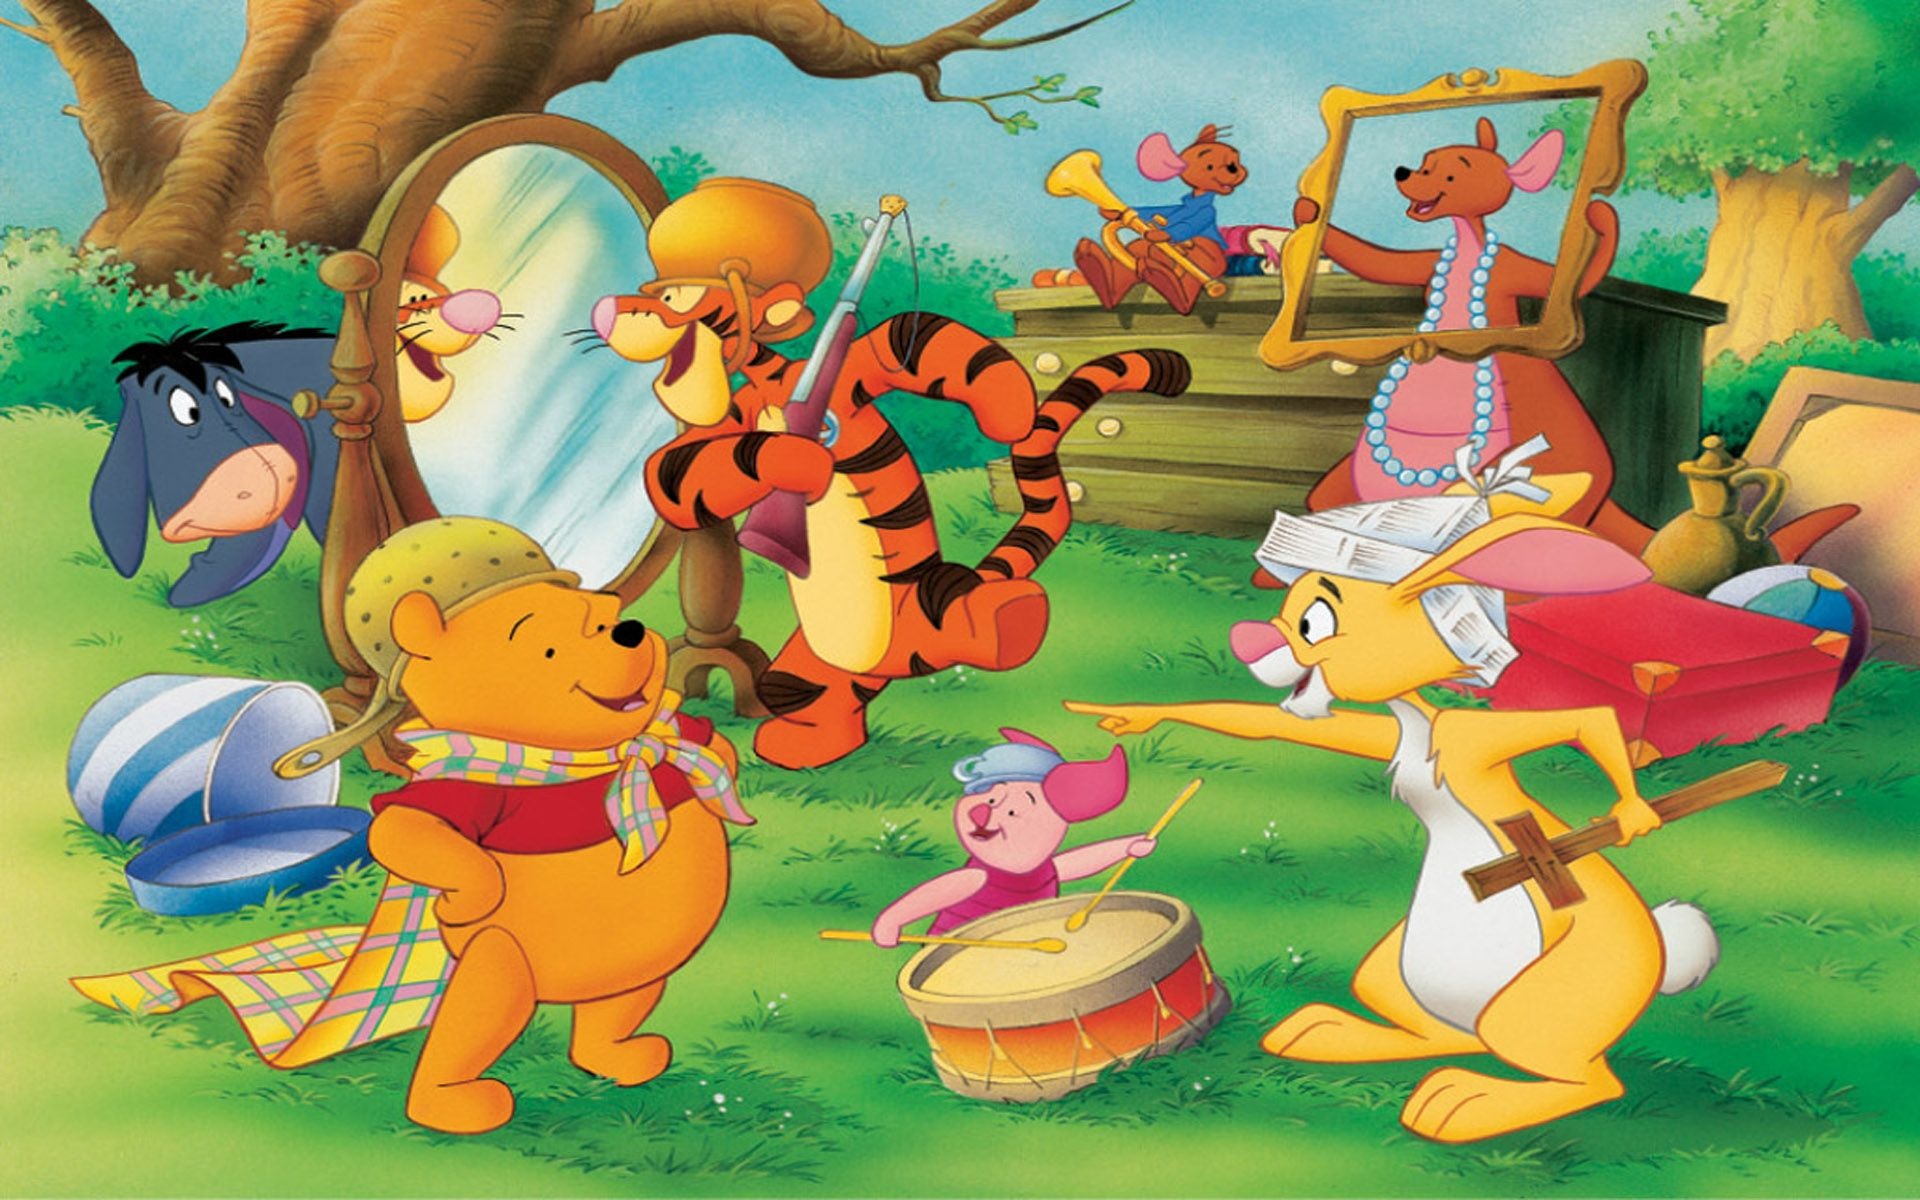 Tigger, Winnie the Pooh, Character wallpapers, Animation, 1920x1200 HD Desktop